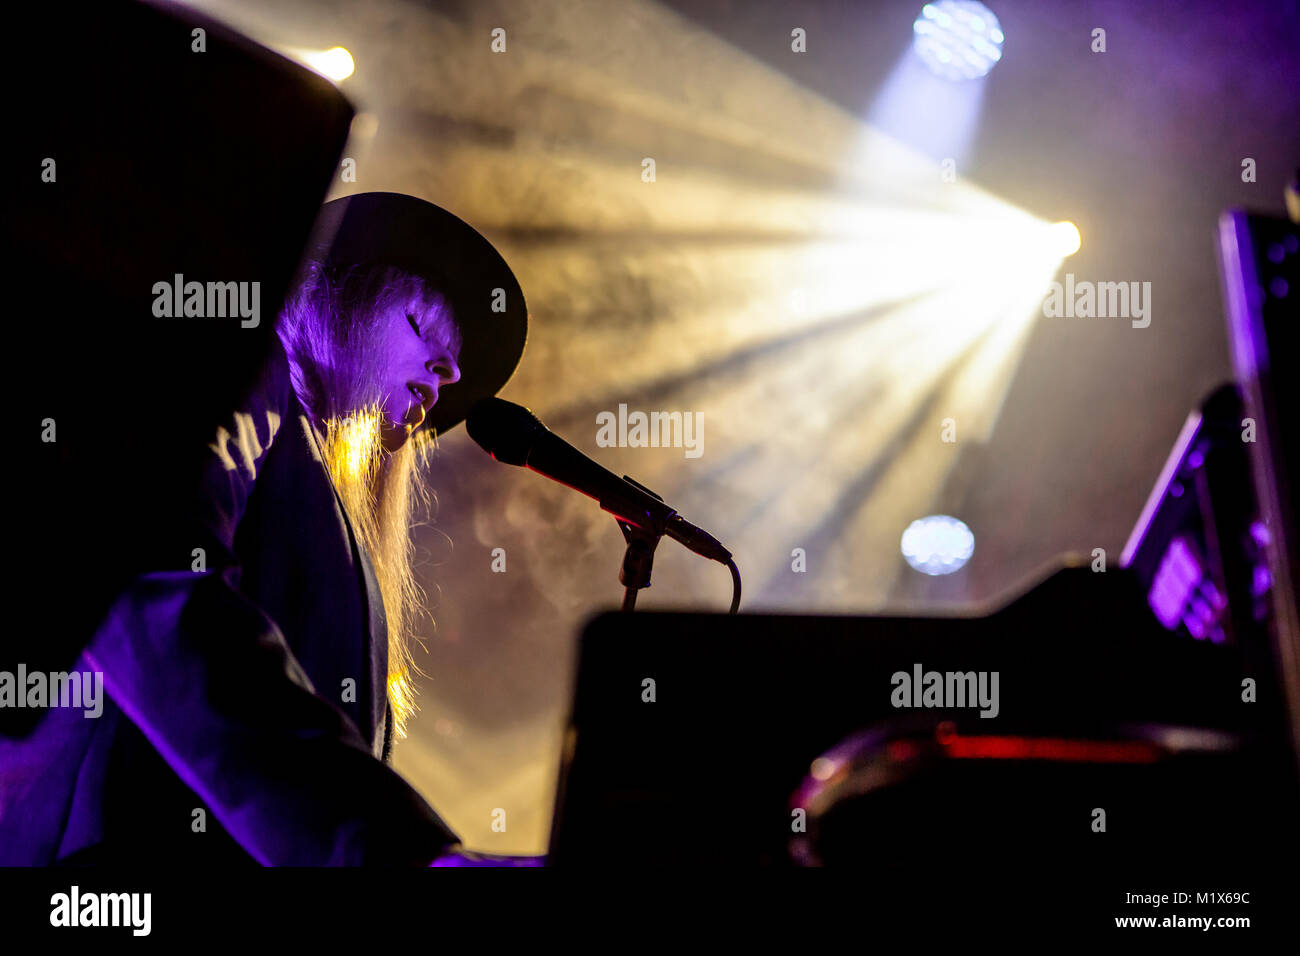 The Norwegian singer, songwriter and musician Susanne Sundfør performs a live concert at USF Verftet in Bergen. Norway, 15/11 2014. Stock Photo